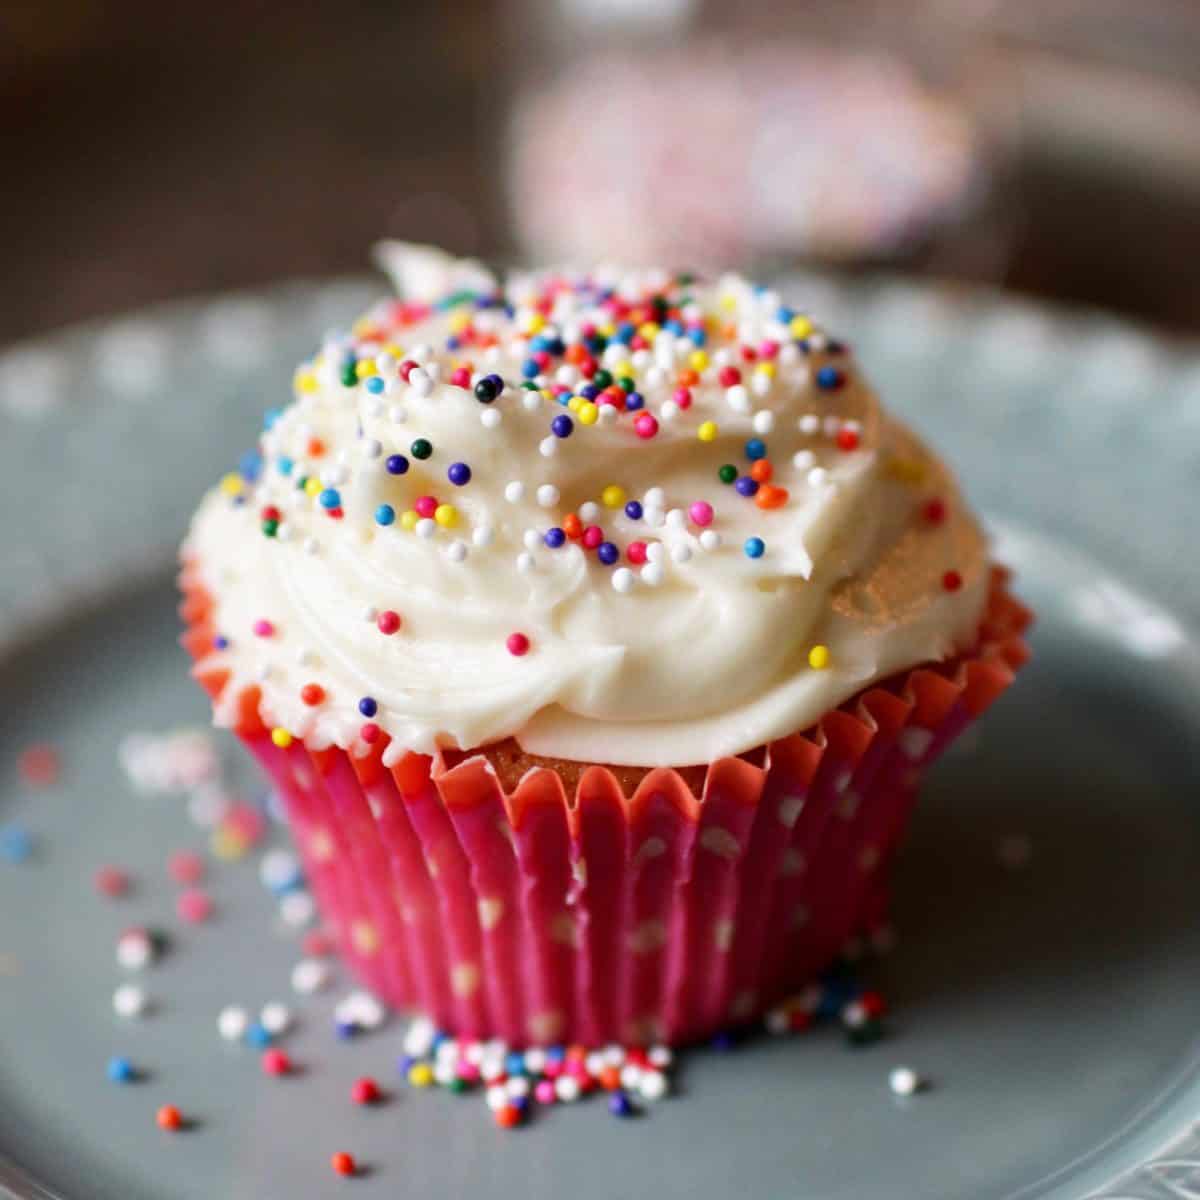 One cupcake topped with vanilla frosting and rainbow colored sprinkles on a plate.